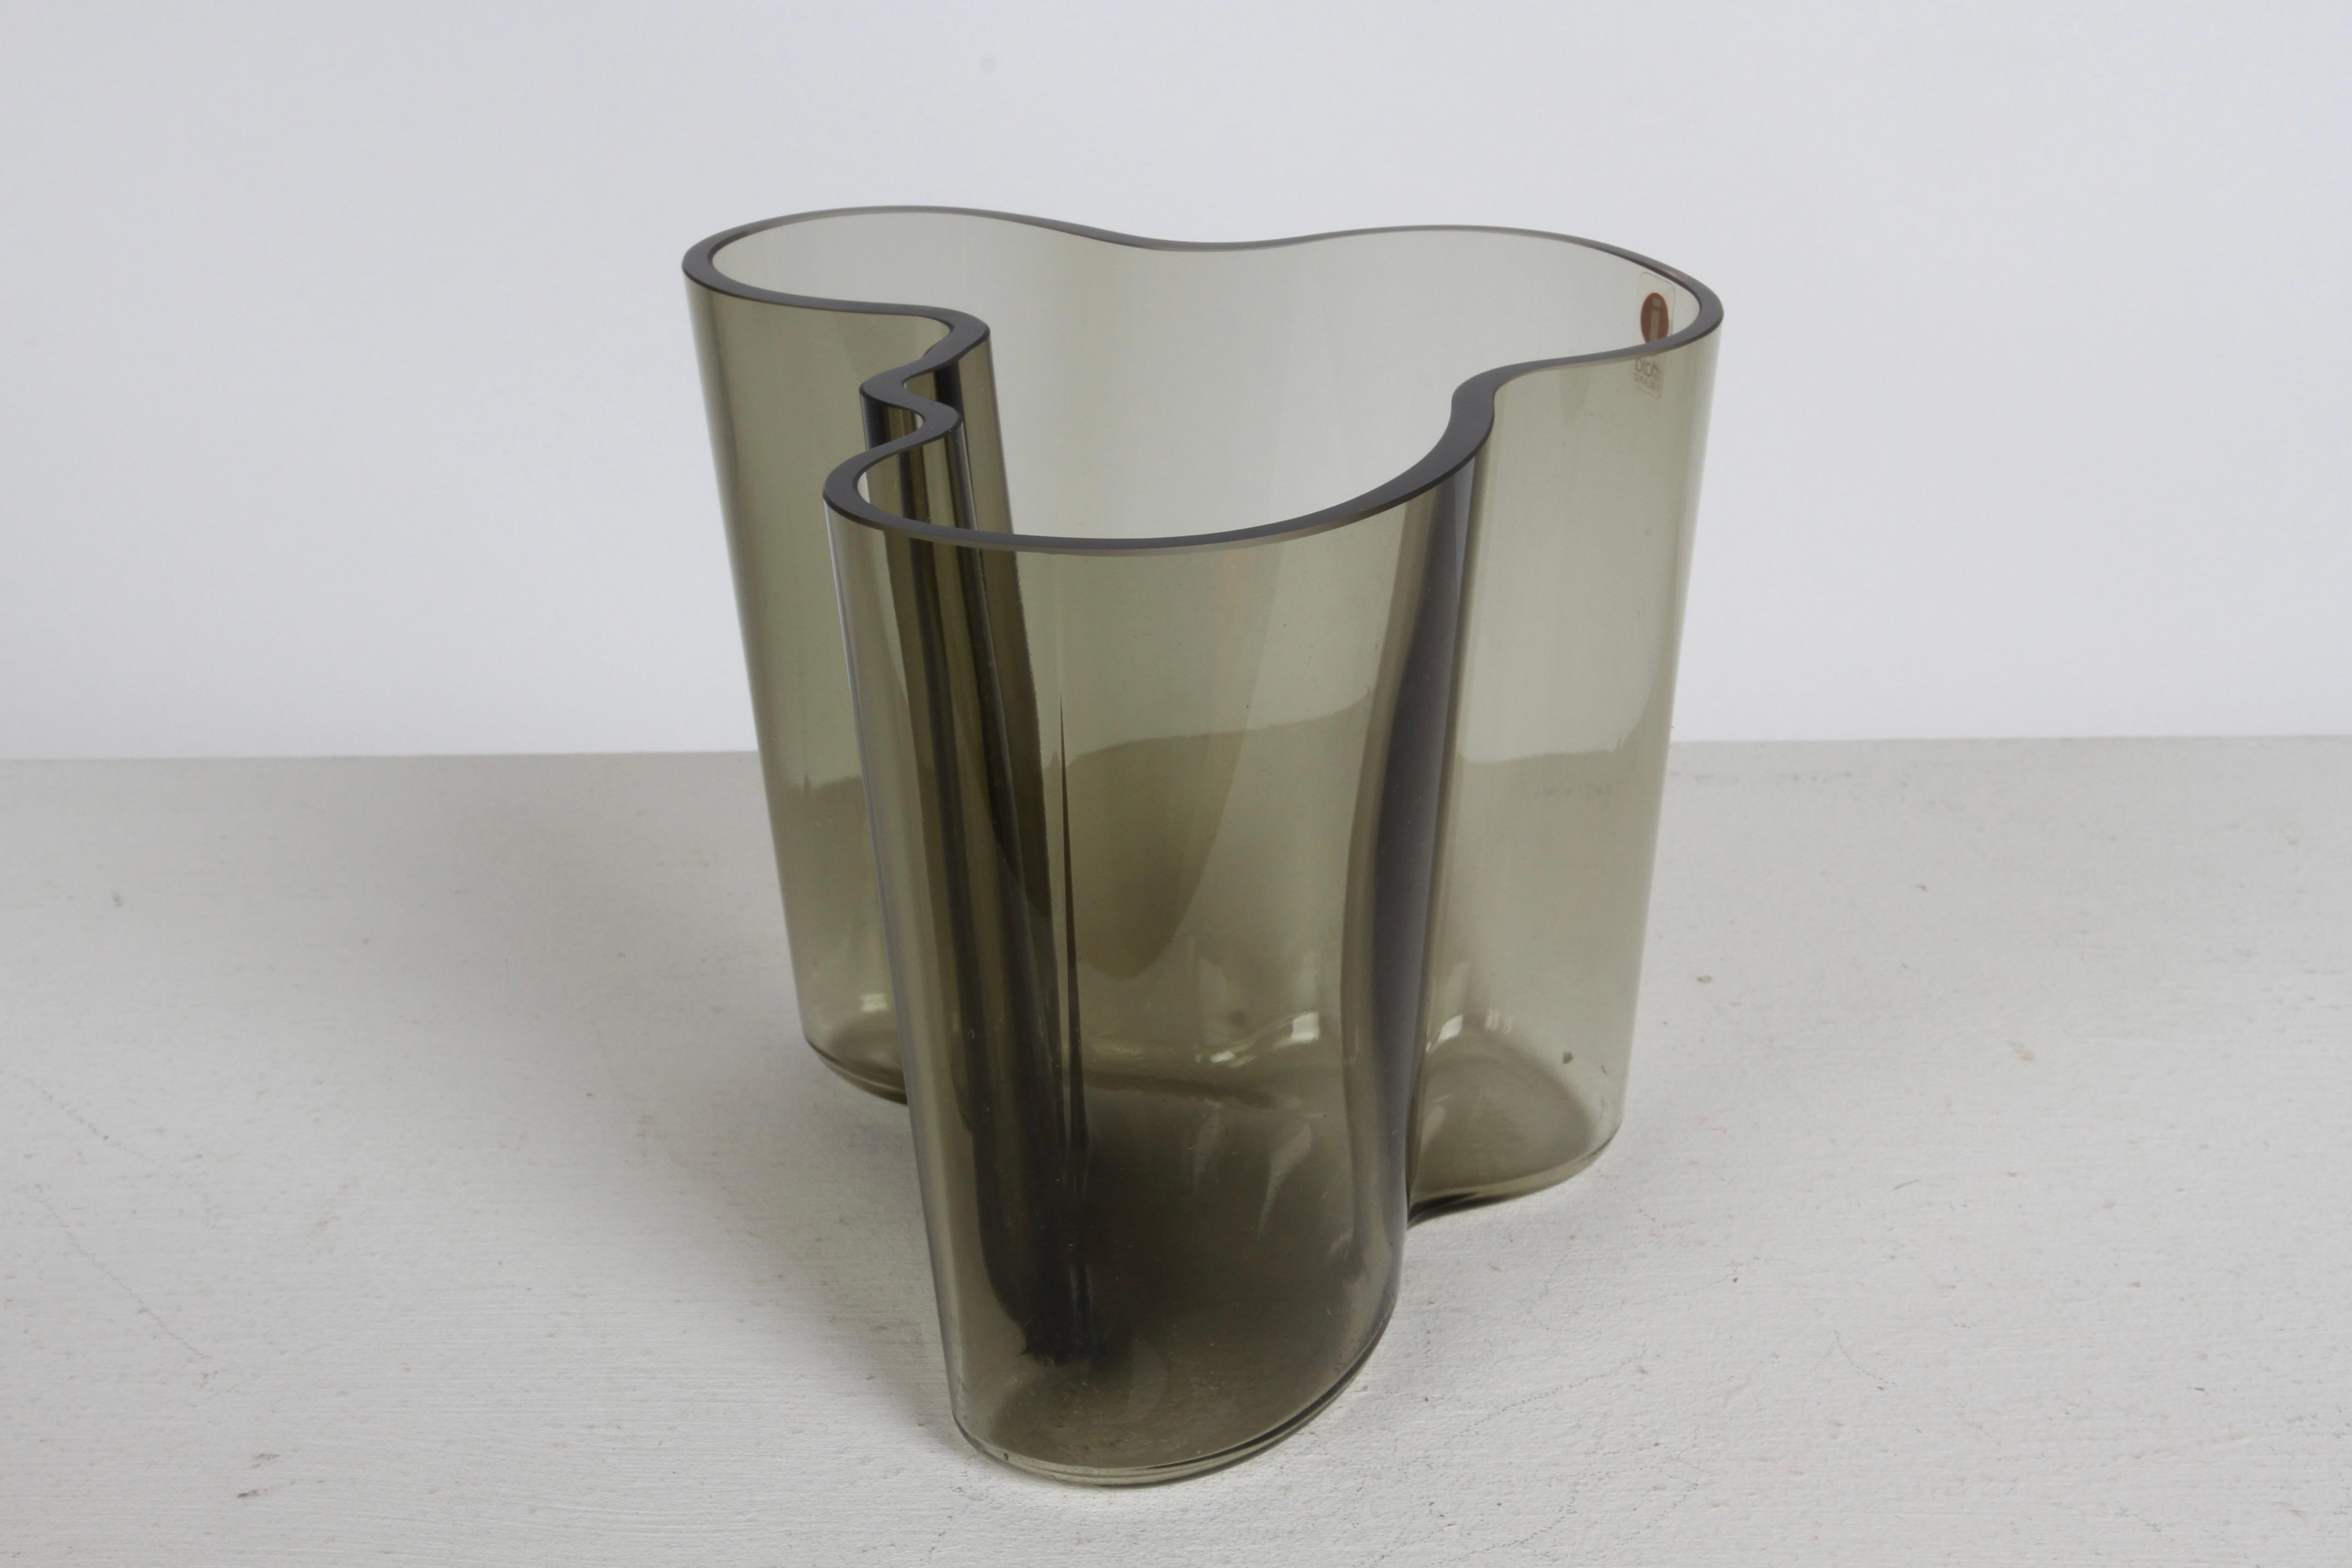 1970s MCM Alvar Aalto Savoy Vase 3030 in Smoke Gray Glass by Iittala Finland For Sale 2